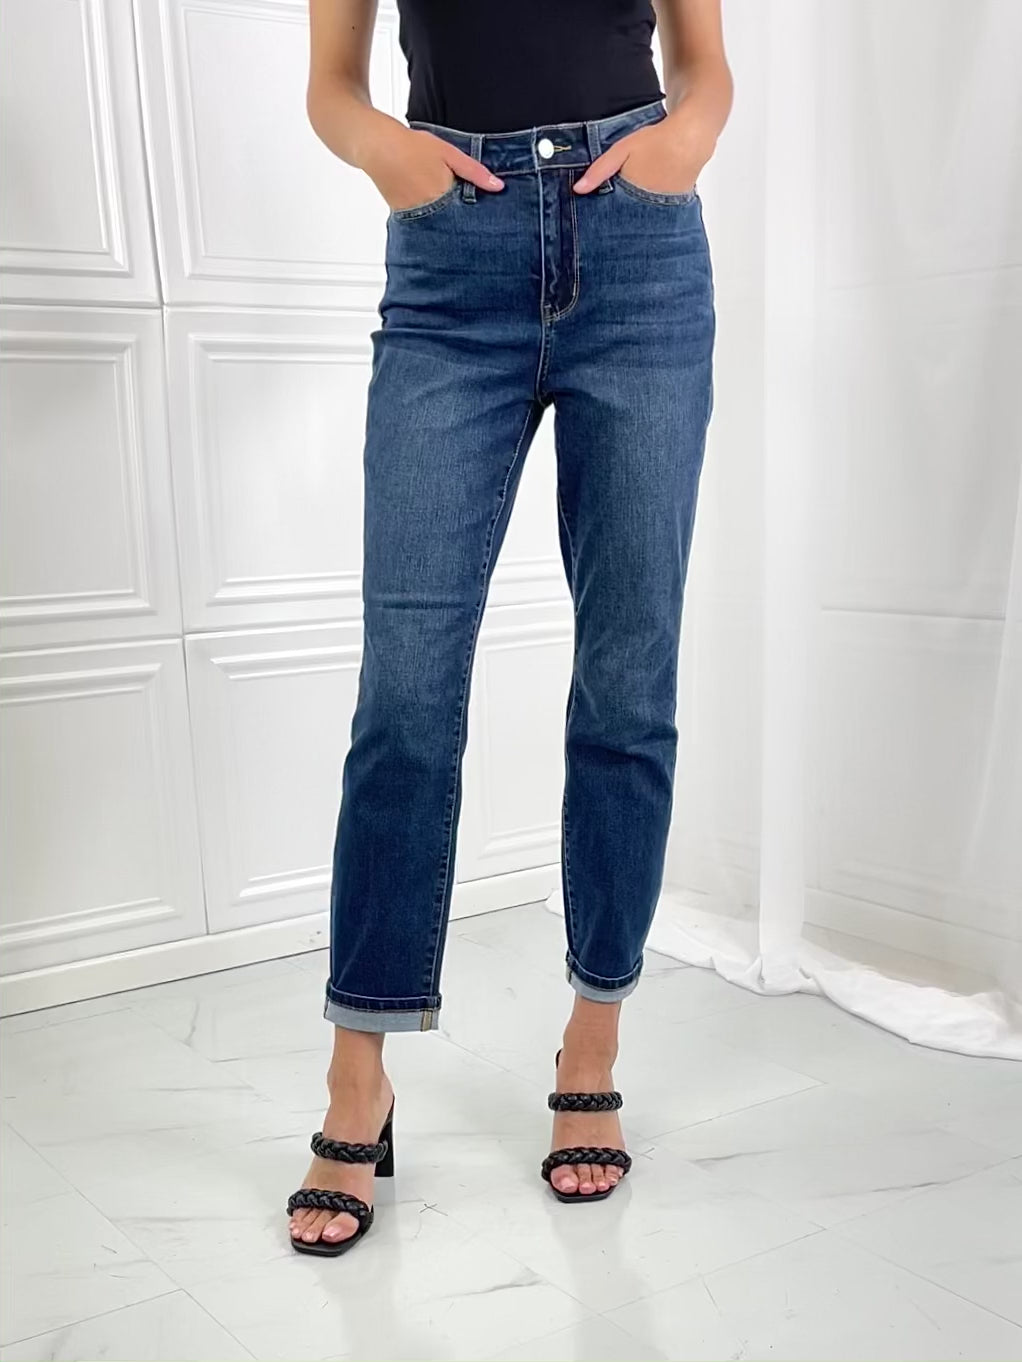 Product Video, Judy Blue, High-Rise Sustainable Cool Denim Cuffed Boyfriend Jeans Style 88608